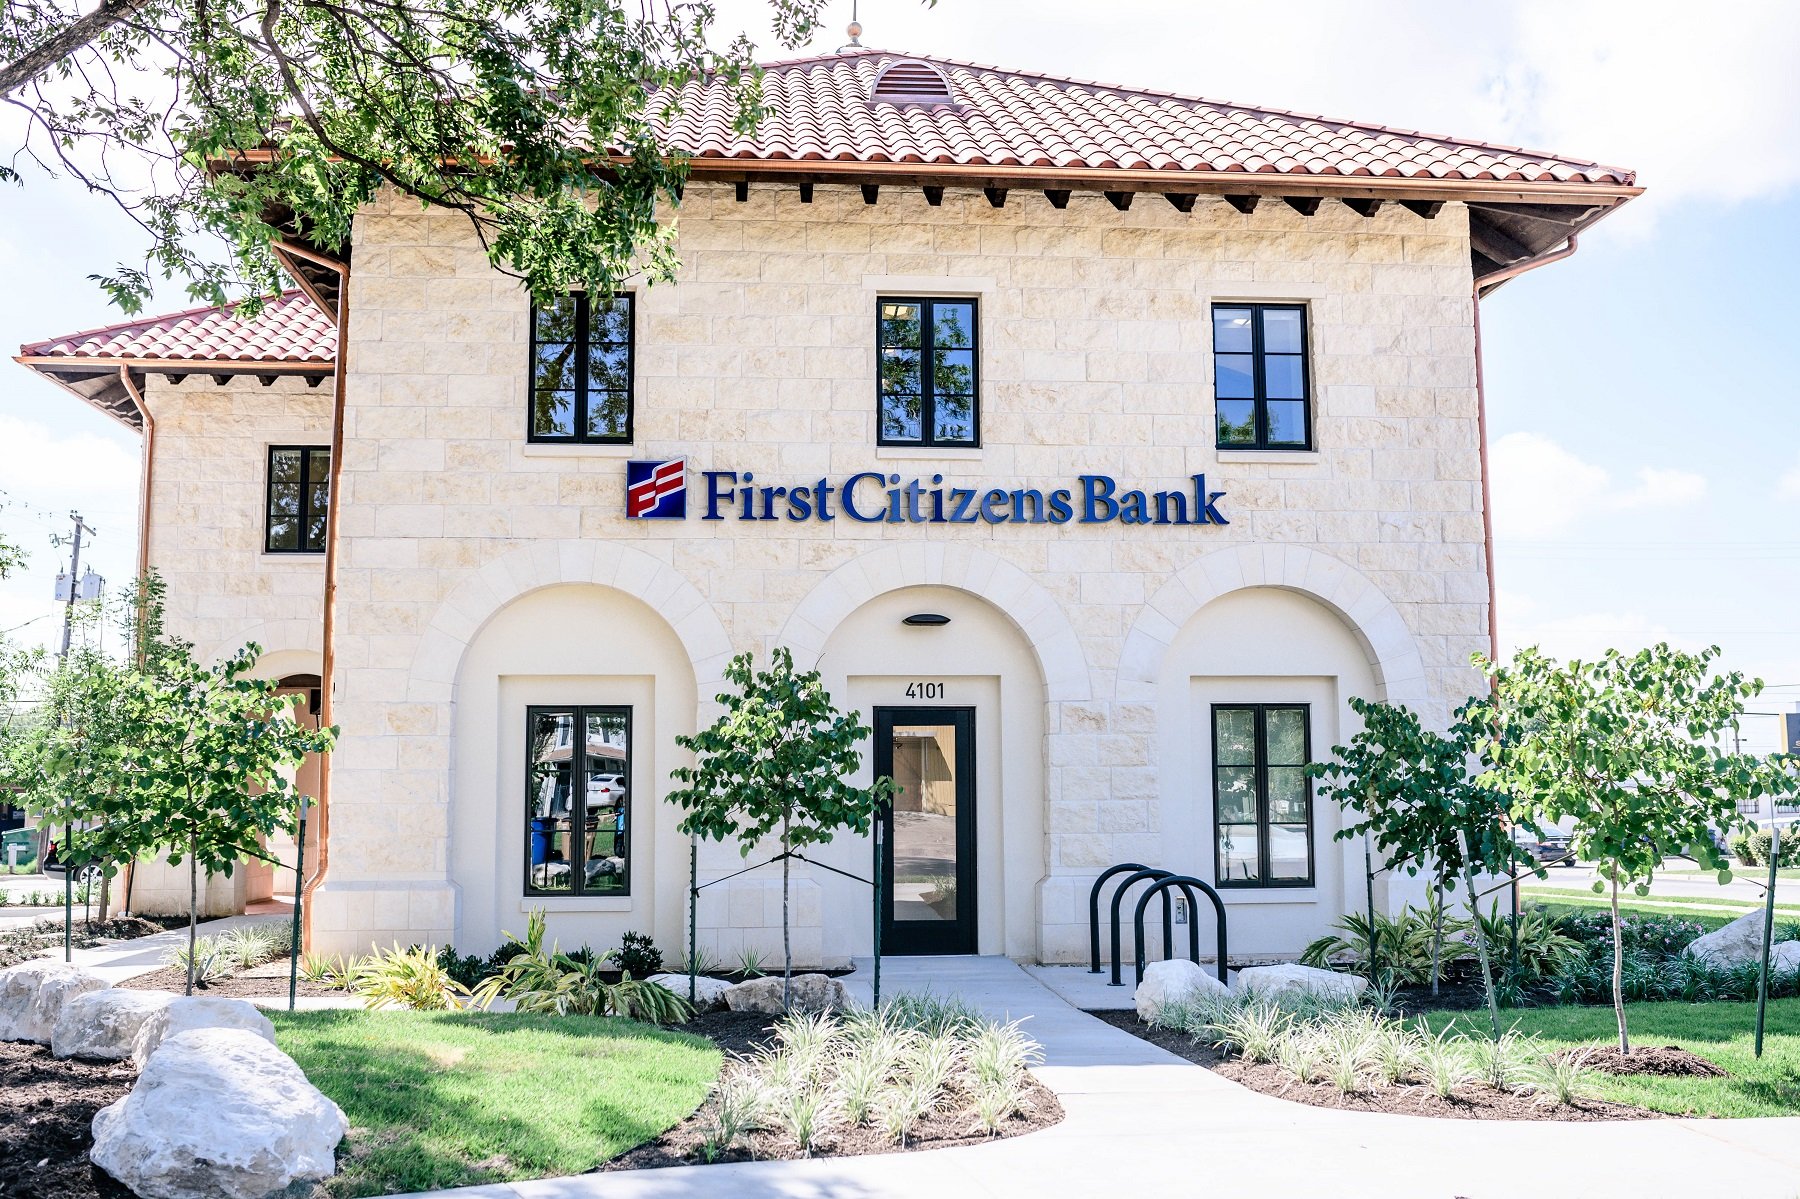 First Citizens Bank in Austin TX completed landscape entrance